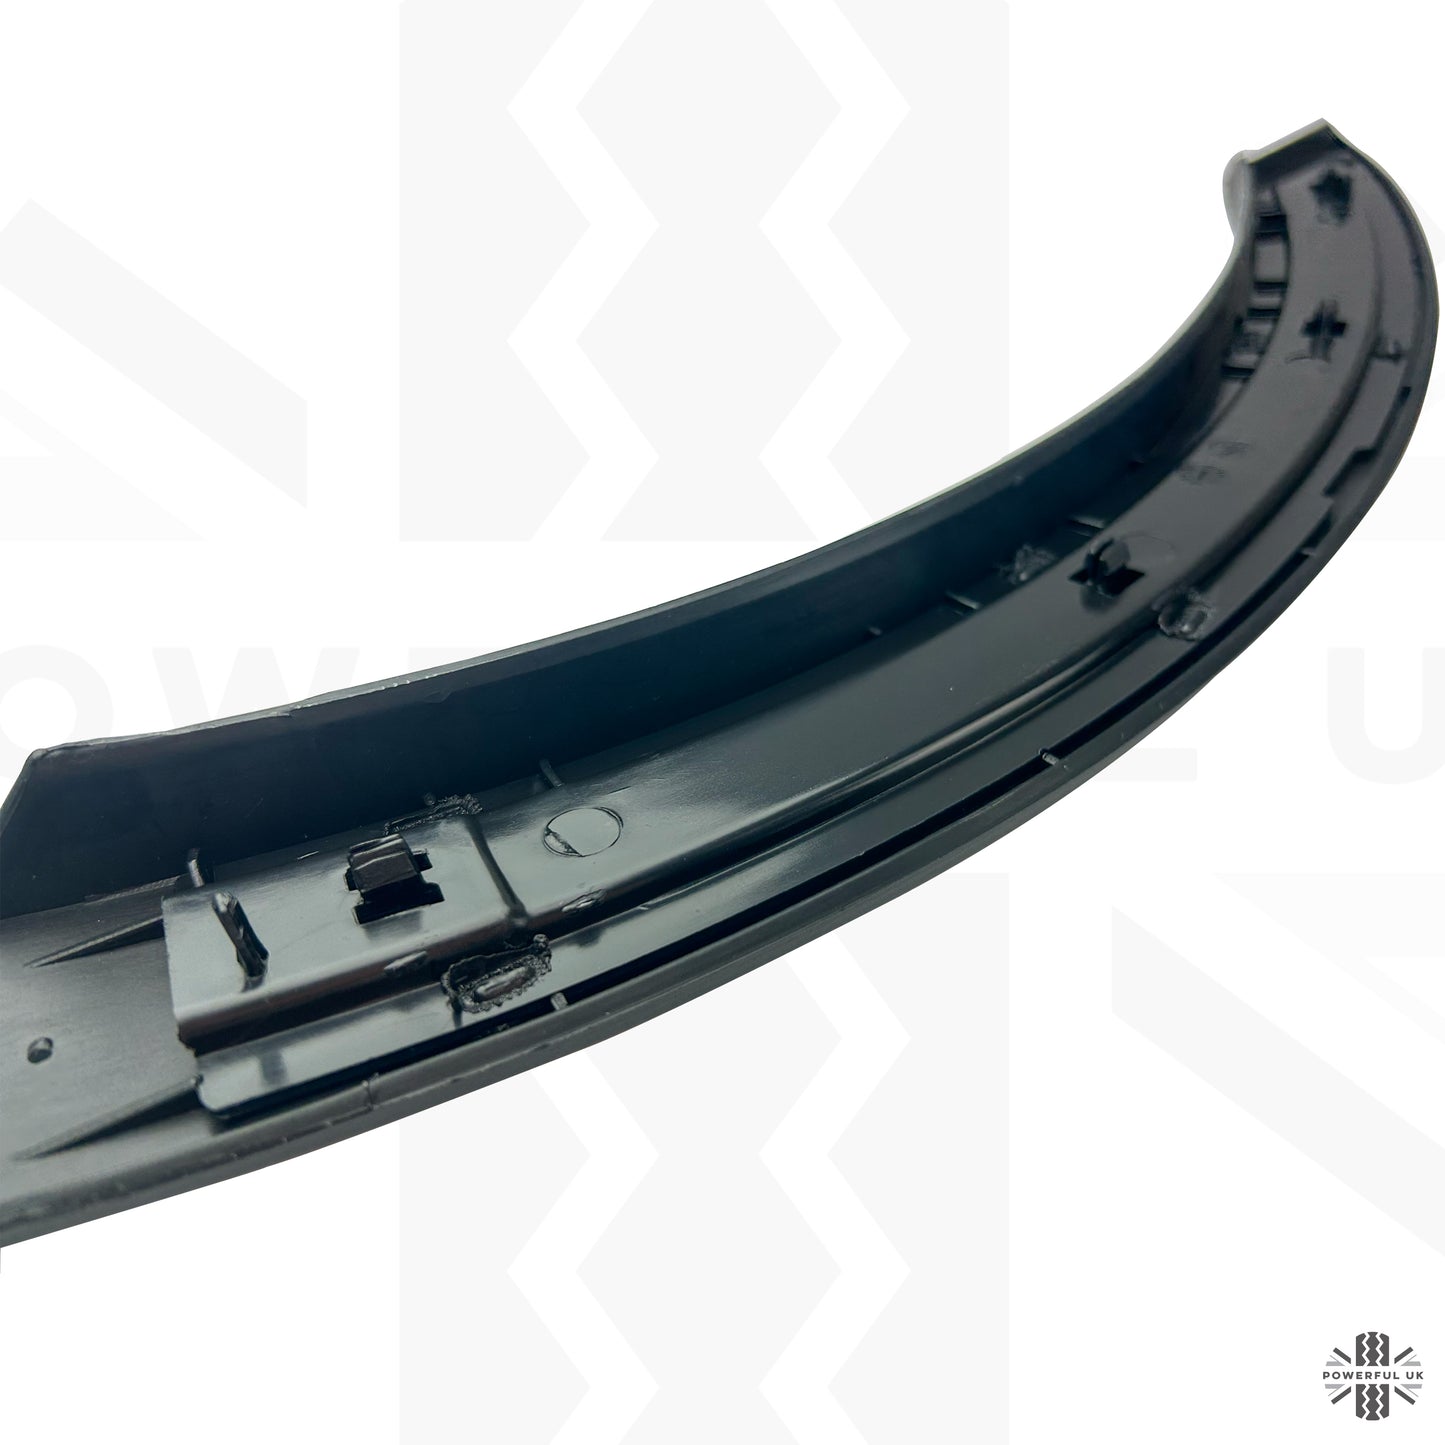 Rear Passenger Door Wheel Arch Trim for Land Rover Discovery Sport - Left